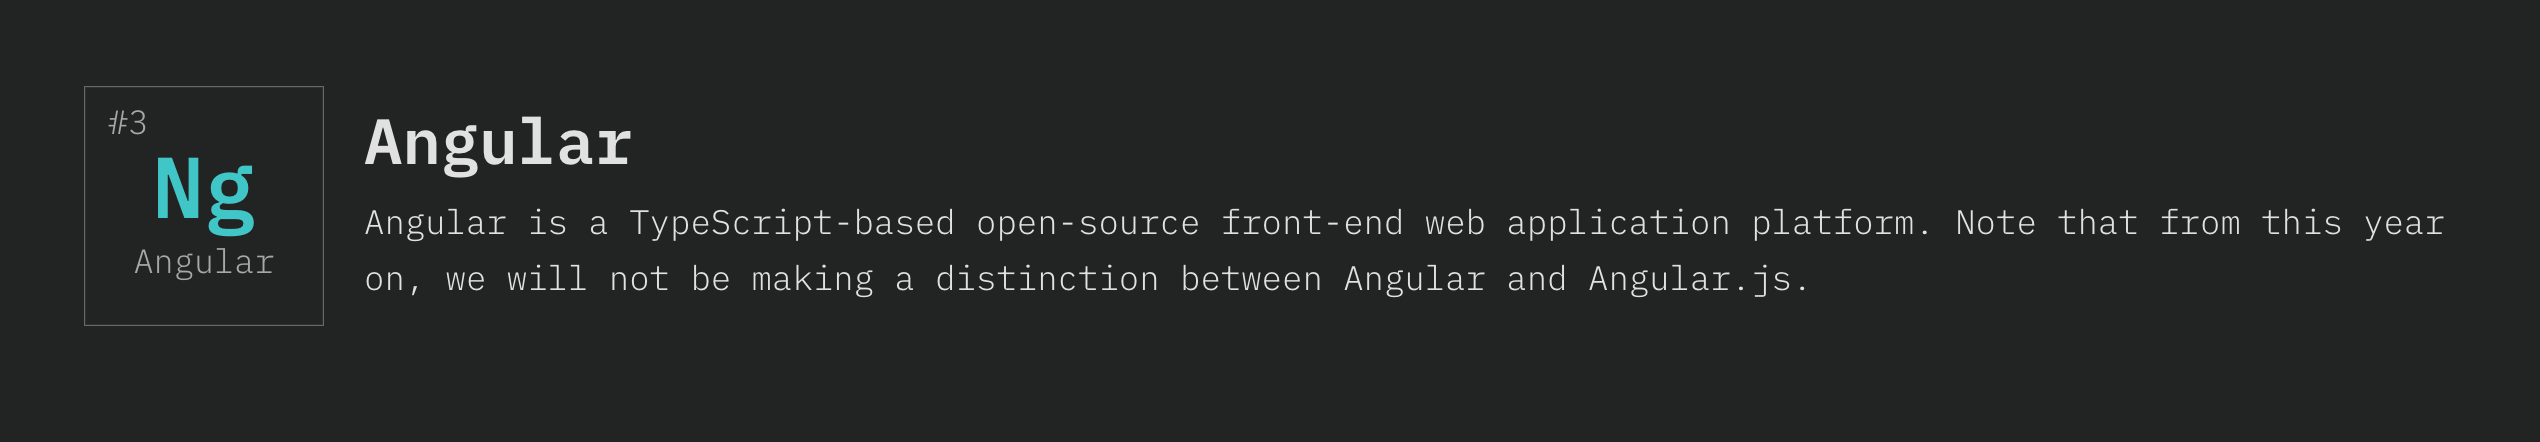 screenshot of quote from survey site: ‘Note that from this year on, we will not be making a distinction between Angular and Angular.js.’